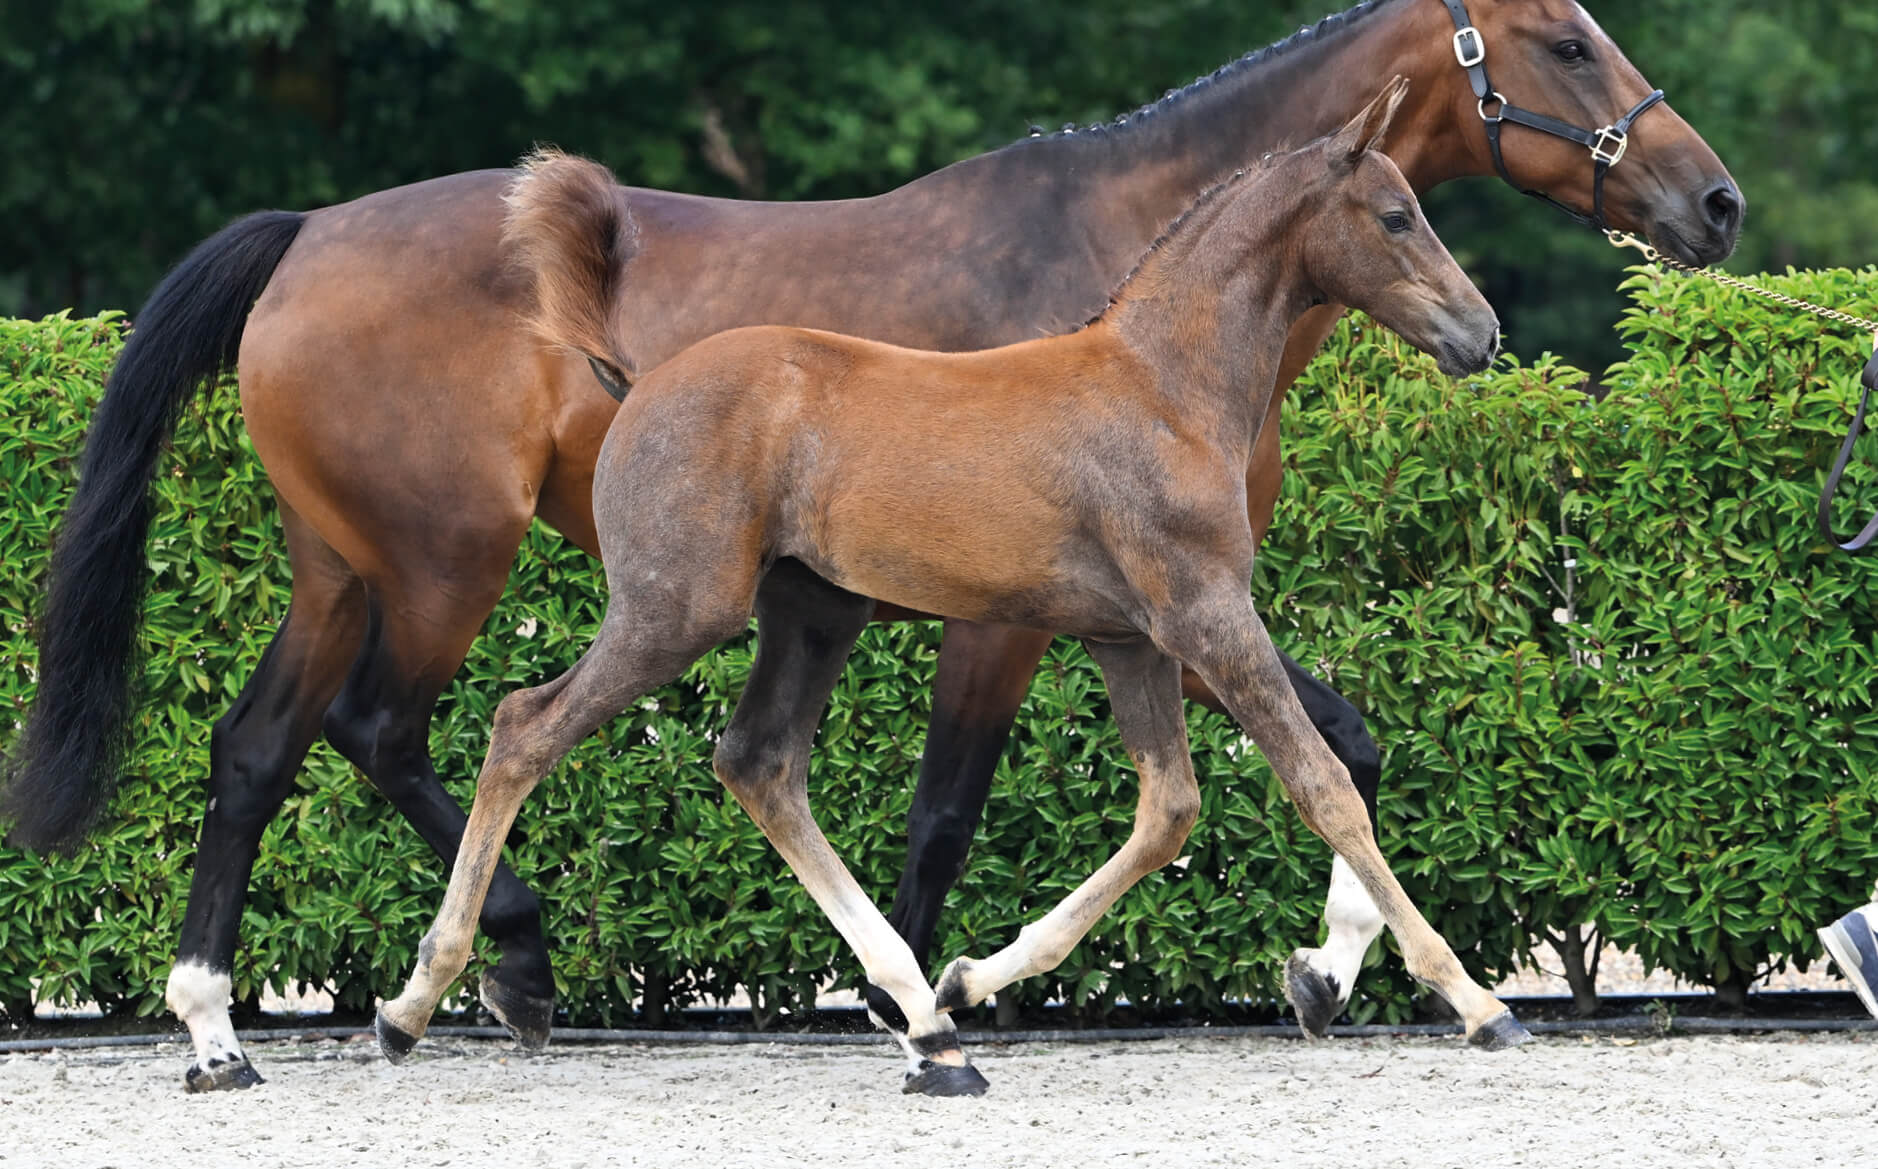 Judy-Ann Melchior: "We impress with never seen foal collection..."